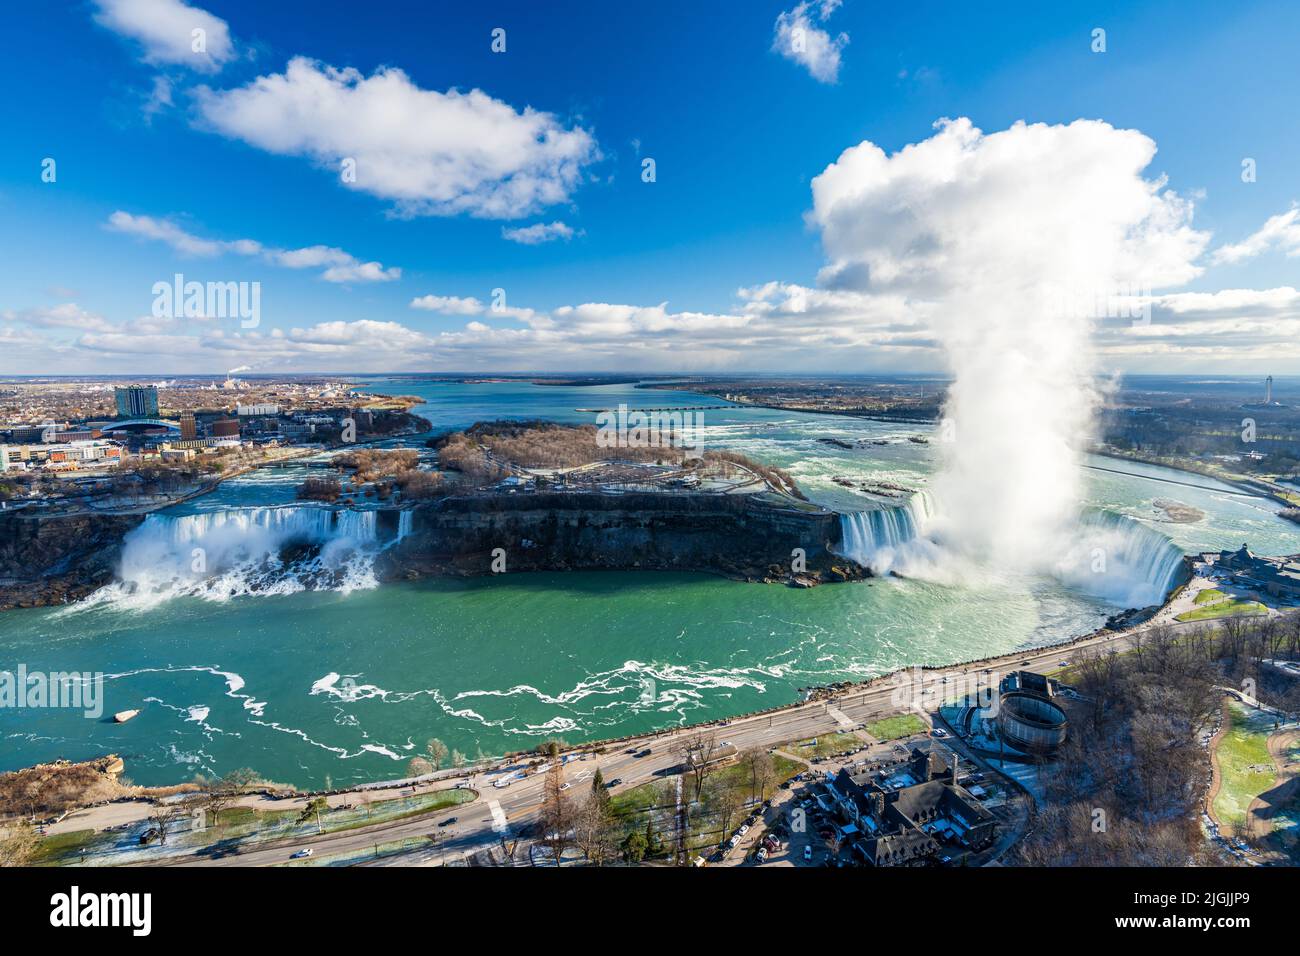 Overlooking the Niagara Falls ( American Falls and Horseshoe Falls ) in a sunny day. Stock Photo